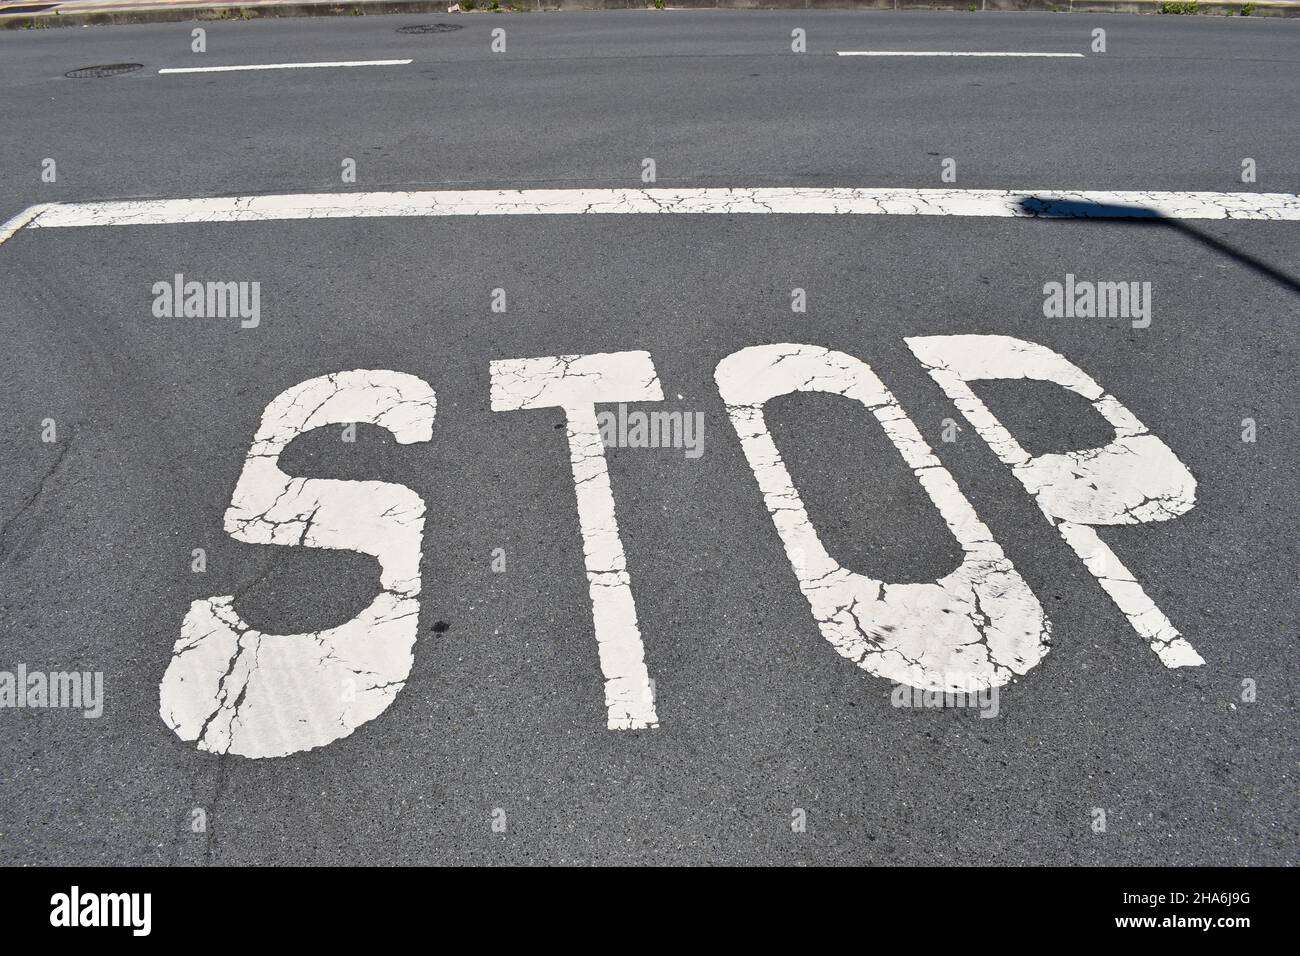 stop sign painted on a asphalt road surface Stock Photo